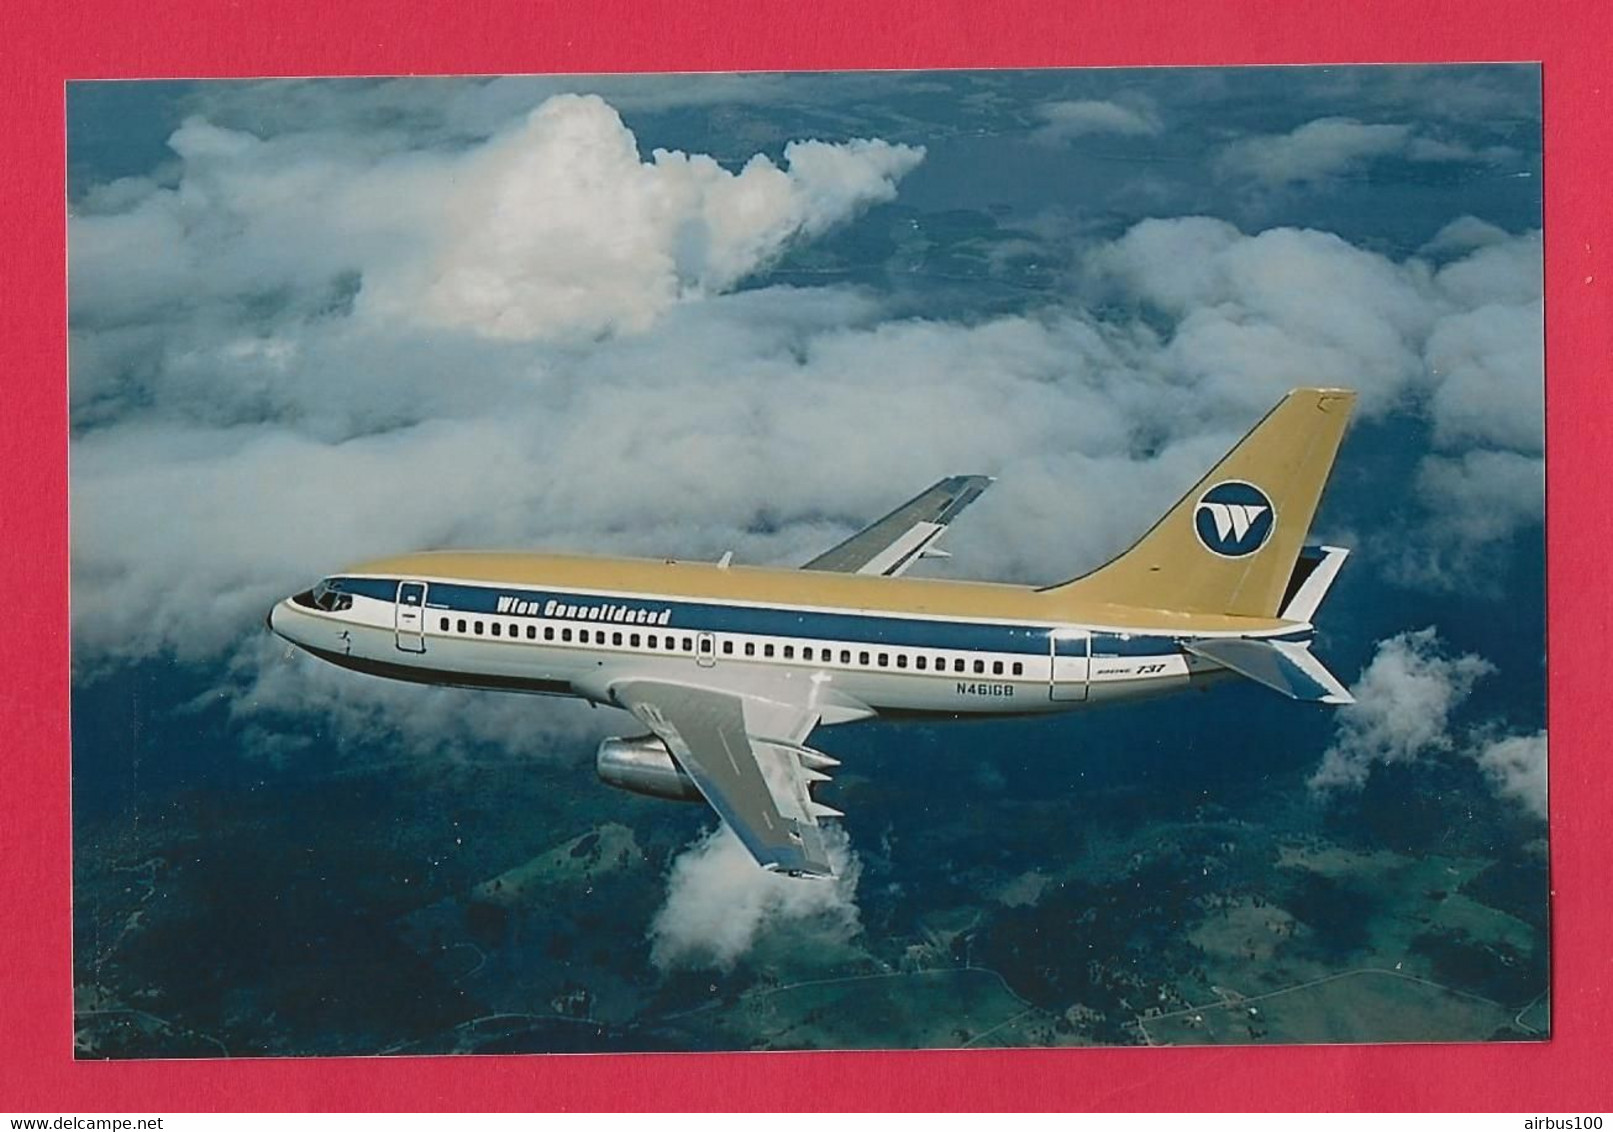 BELLE PHOTO REPRODUCTION AVION PLANE FLUGZEUG - BOEING 737 WIEN CONSOLIDATED - Aviation